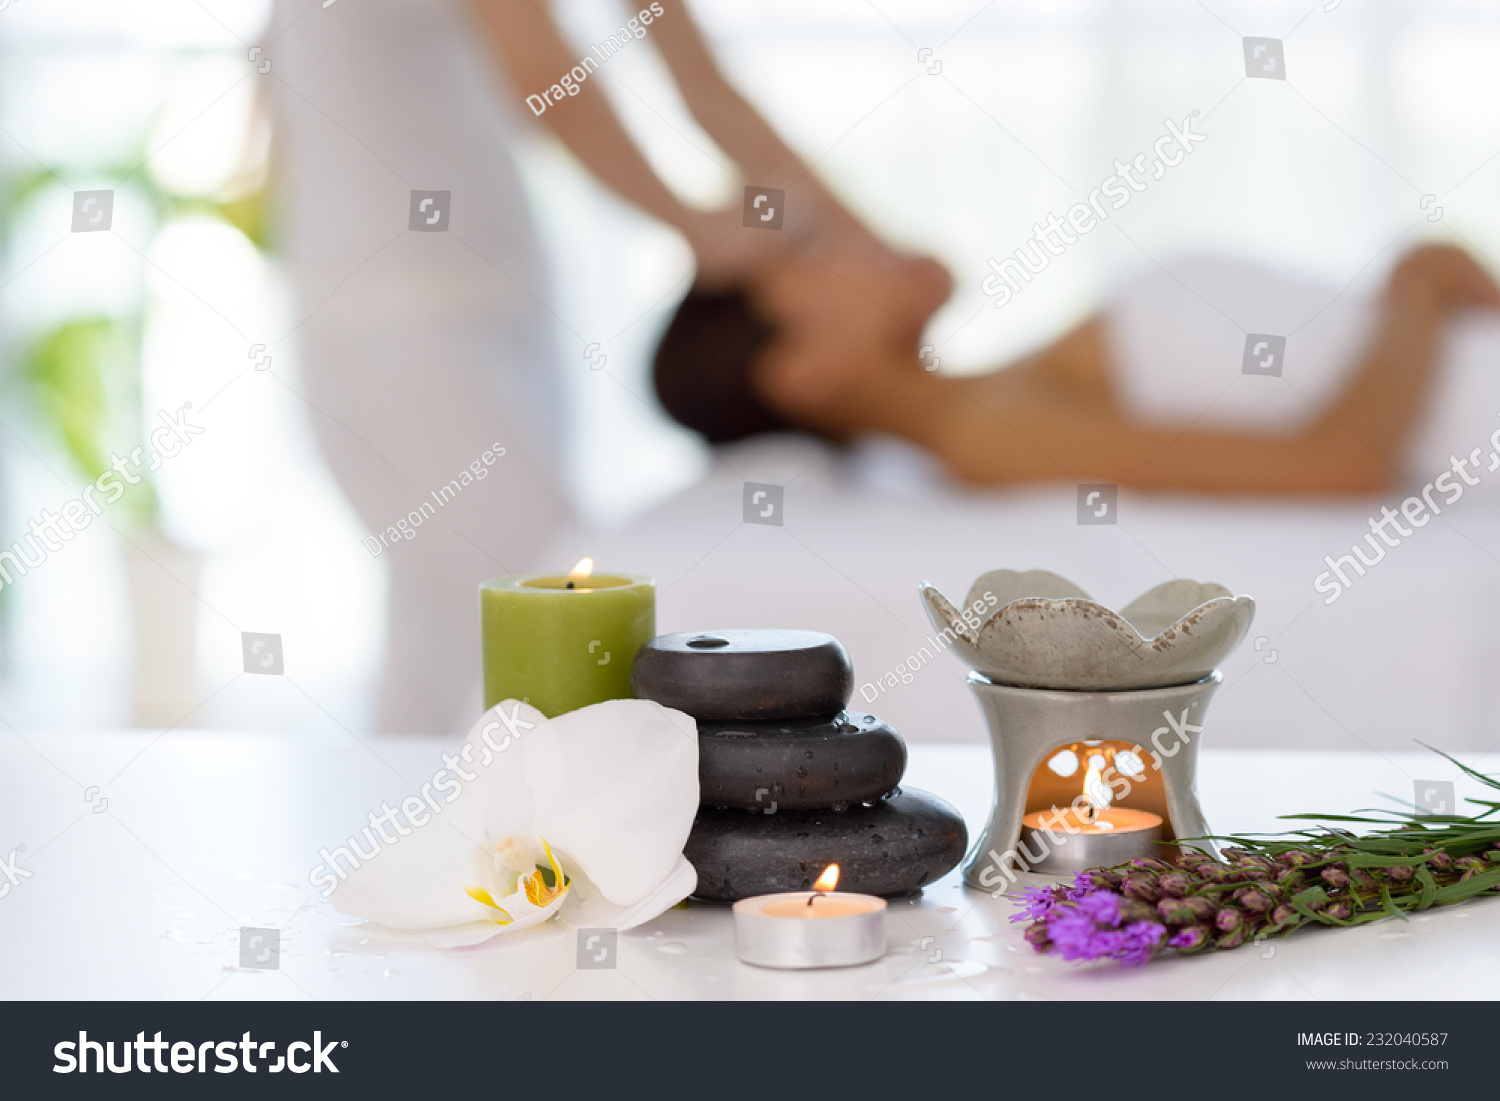 Spa concept: zen stones, candles and flowers on the background of woman receiving treatment #232040587